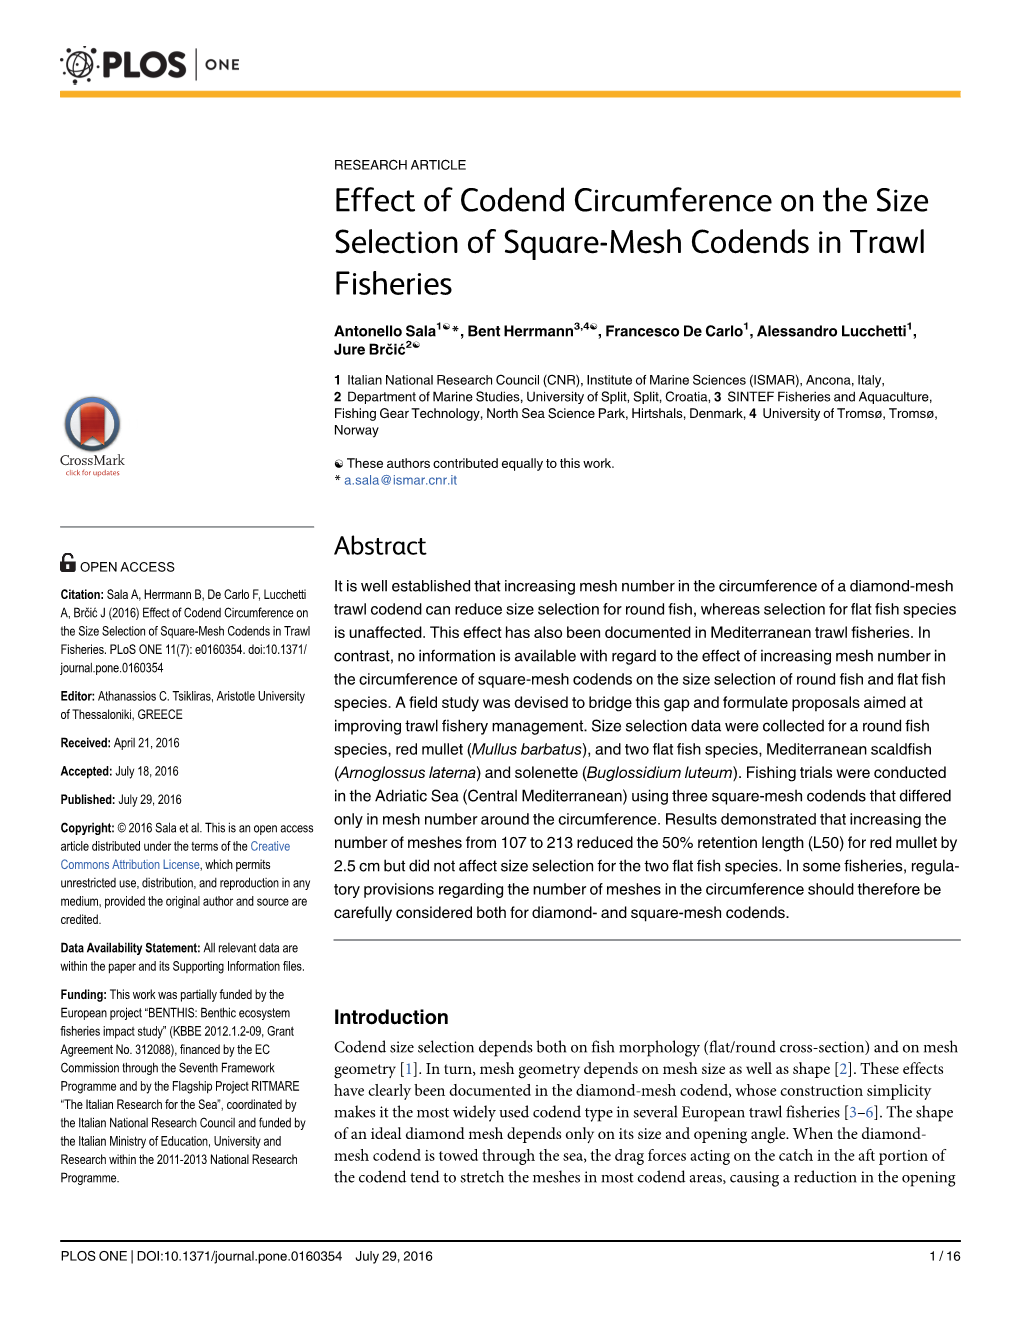 Effect of Codend Circumference on the Size Selection of Square-Mesh Codends in Trawl Fisheries